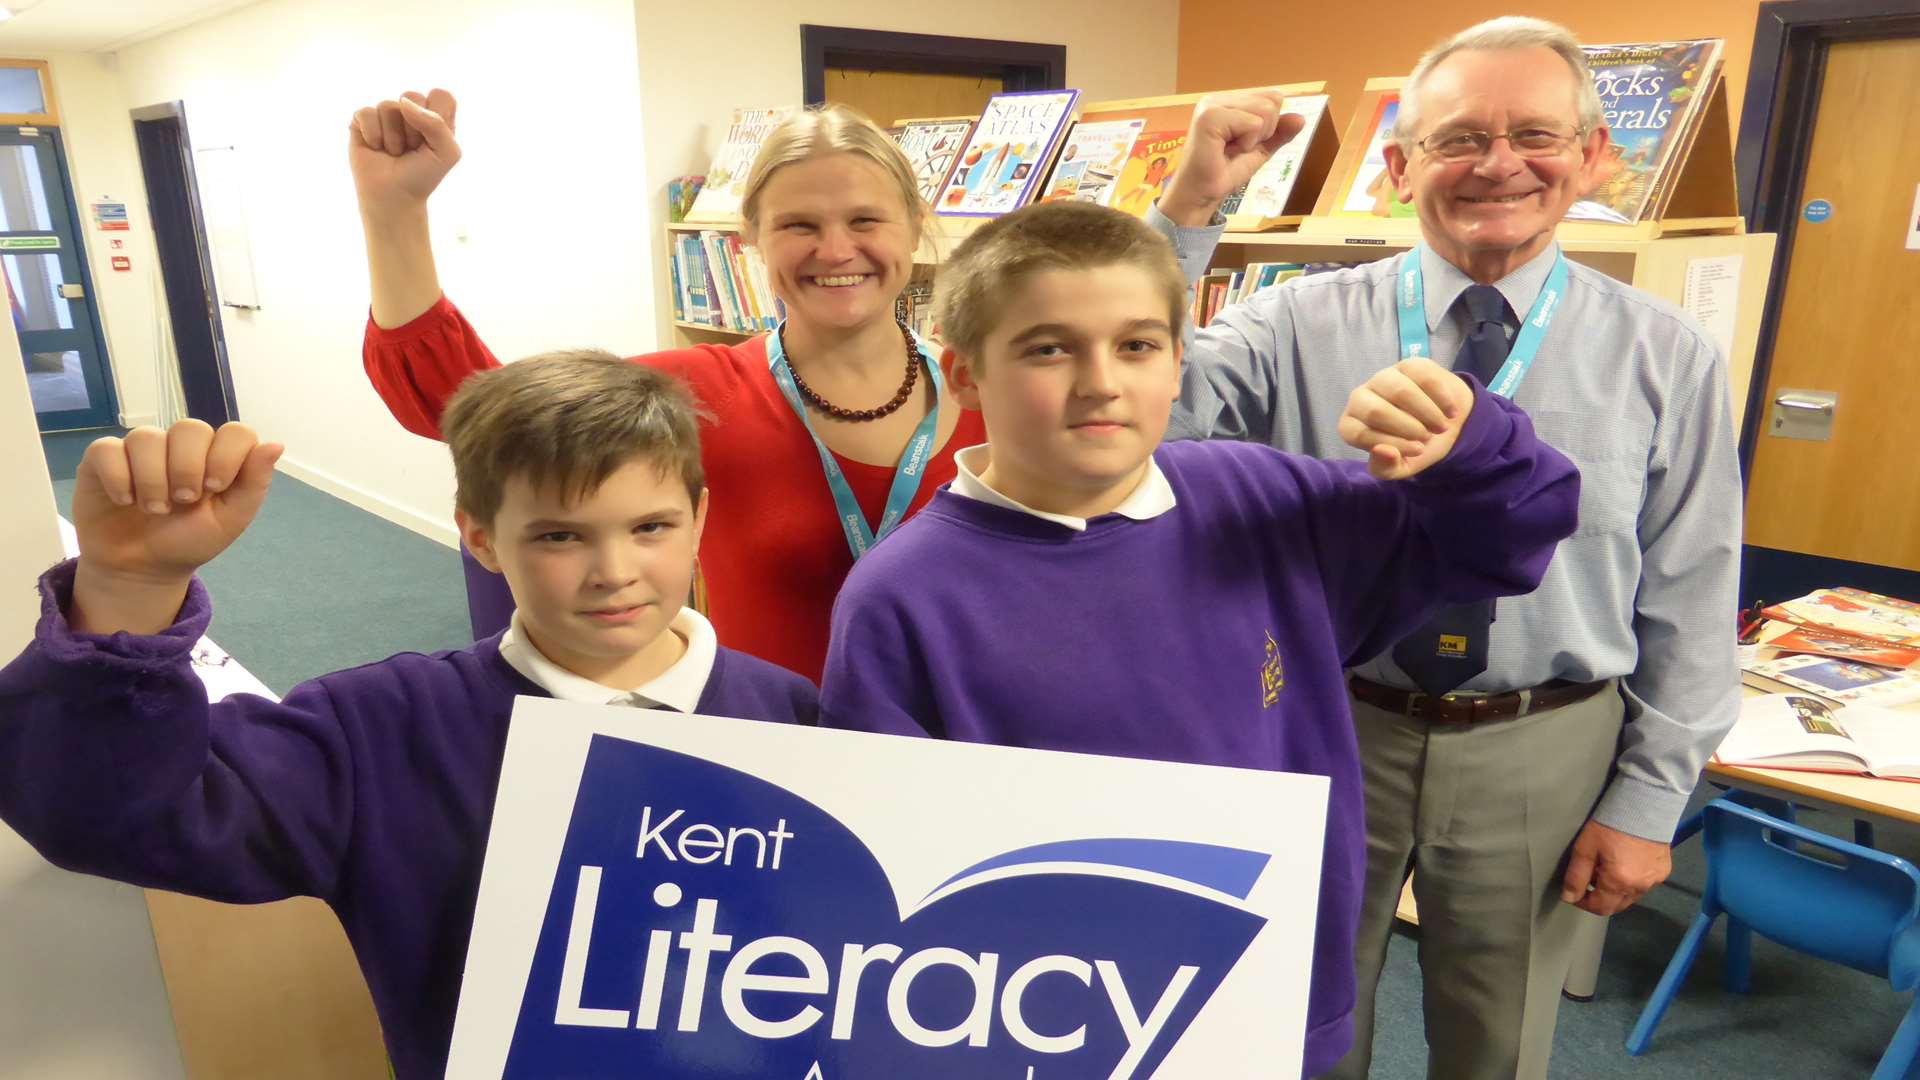 Malou Bengtsson-Wheeler and Pat Lacy of Beanstalk announce support of Kent Literacy Awards 2016 with pupils Bruce Thorpe and Jack Webb from Archbishop Courtney CE Primary School, Maidstone